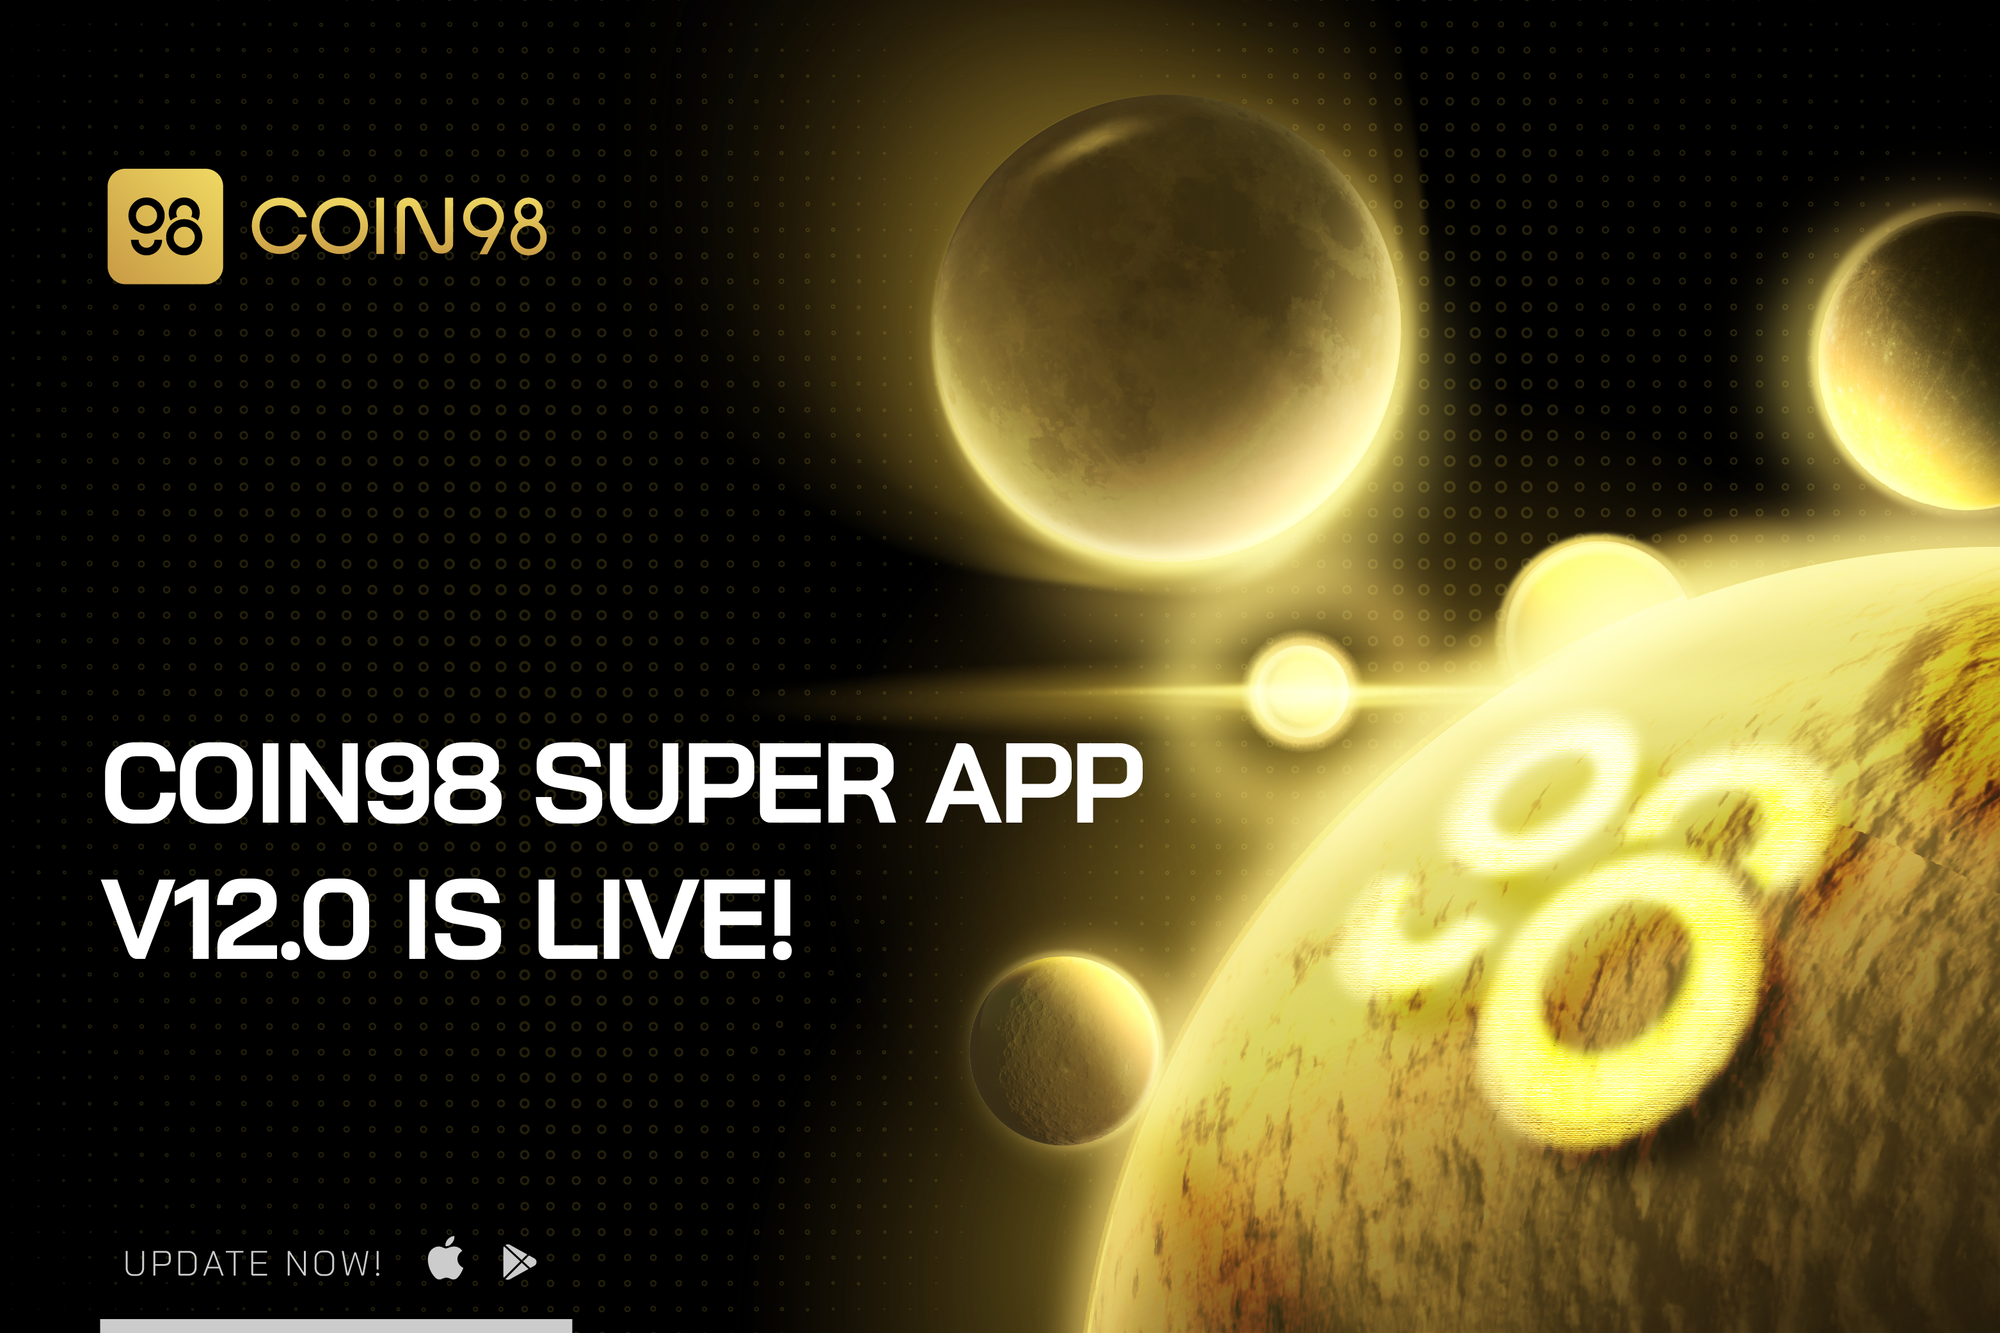 Coin98 Super App V12.0 - A new terrace of smart routing experience